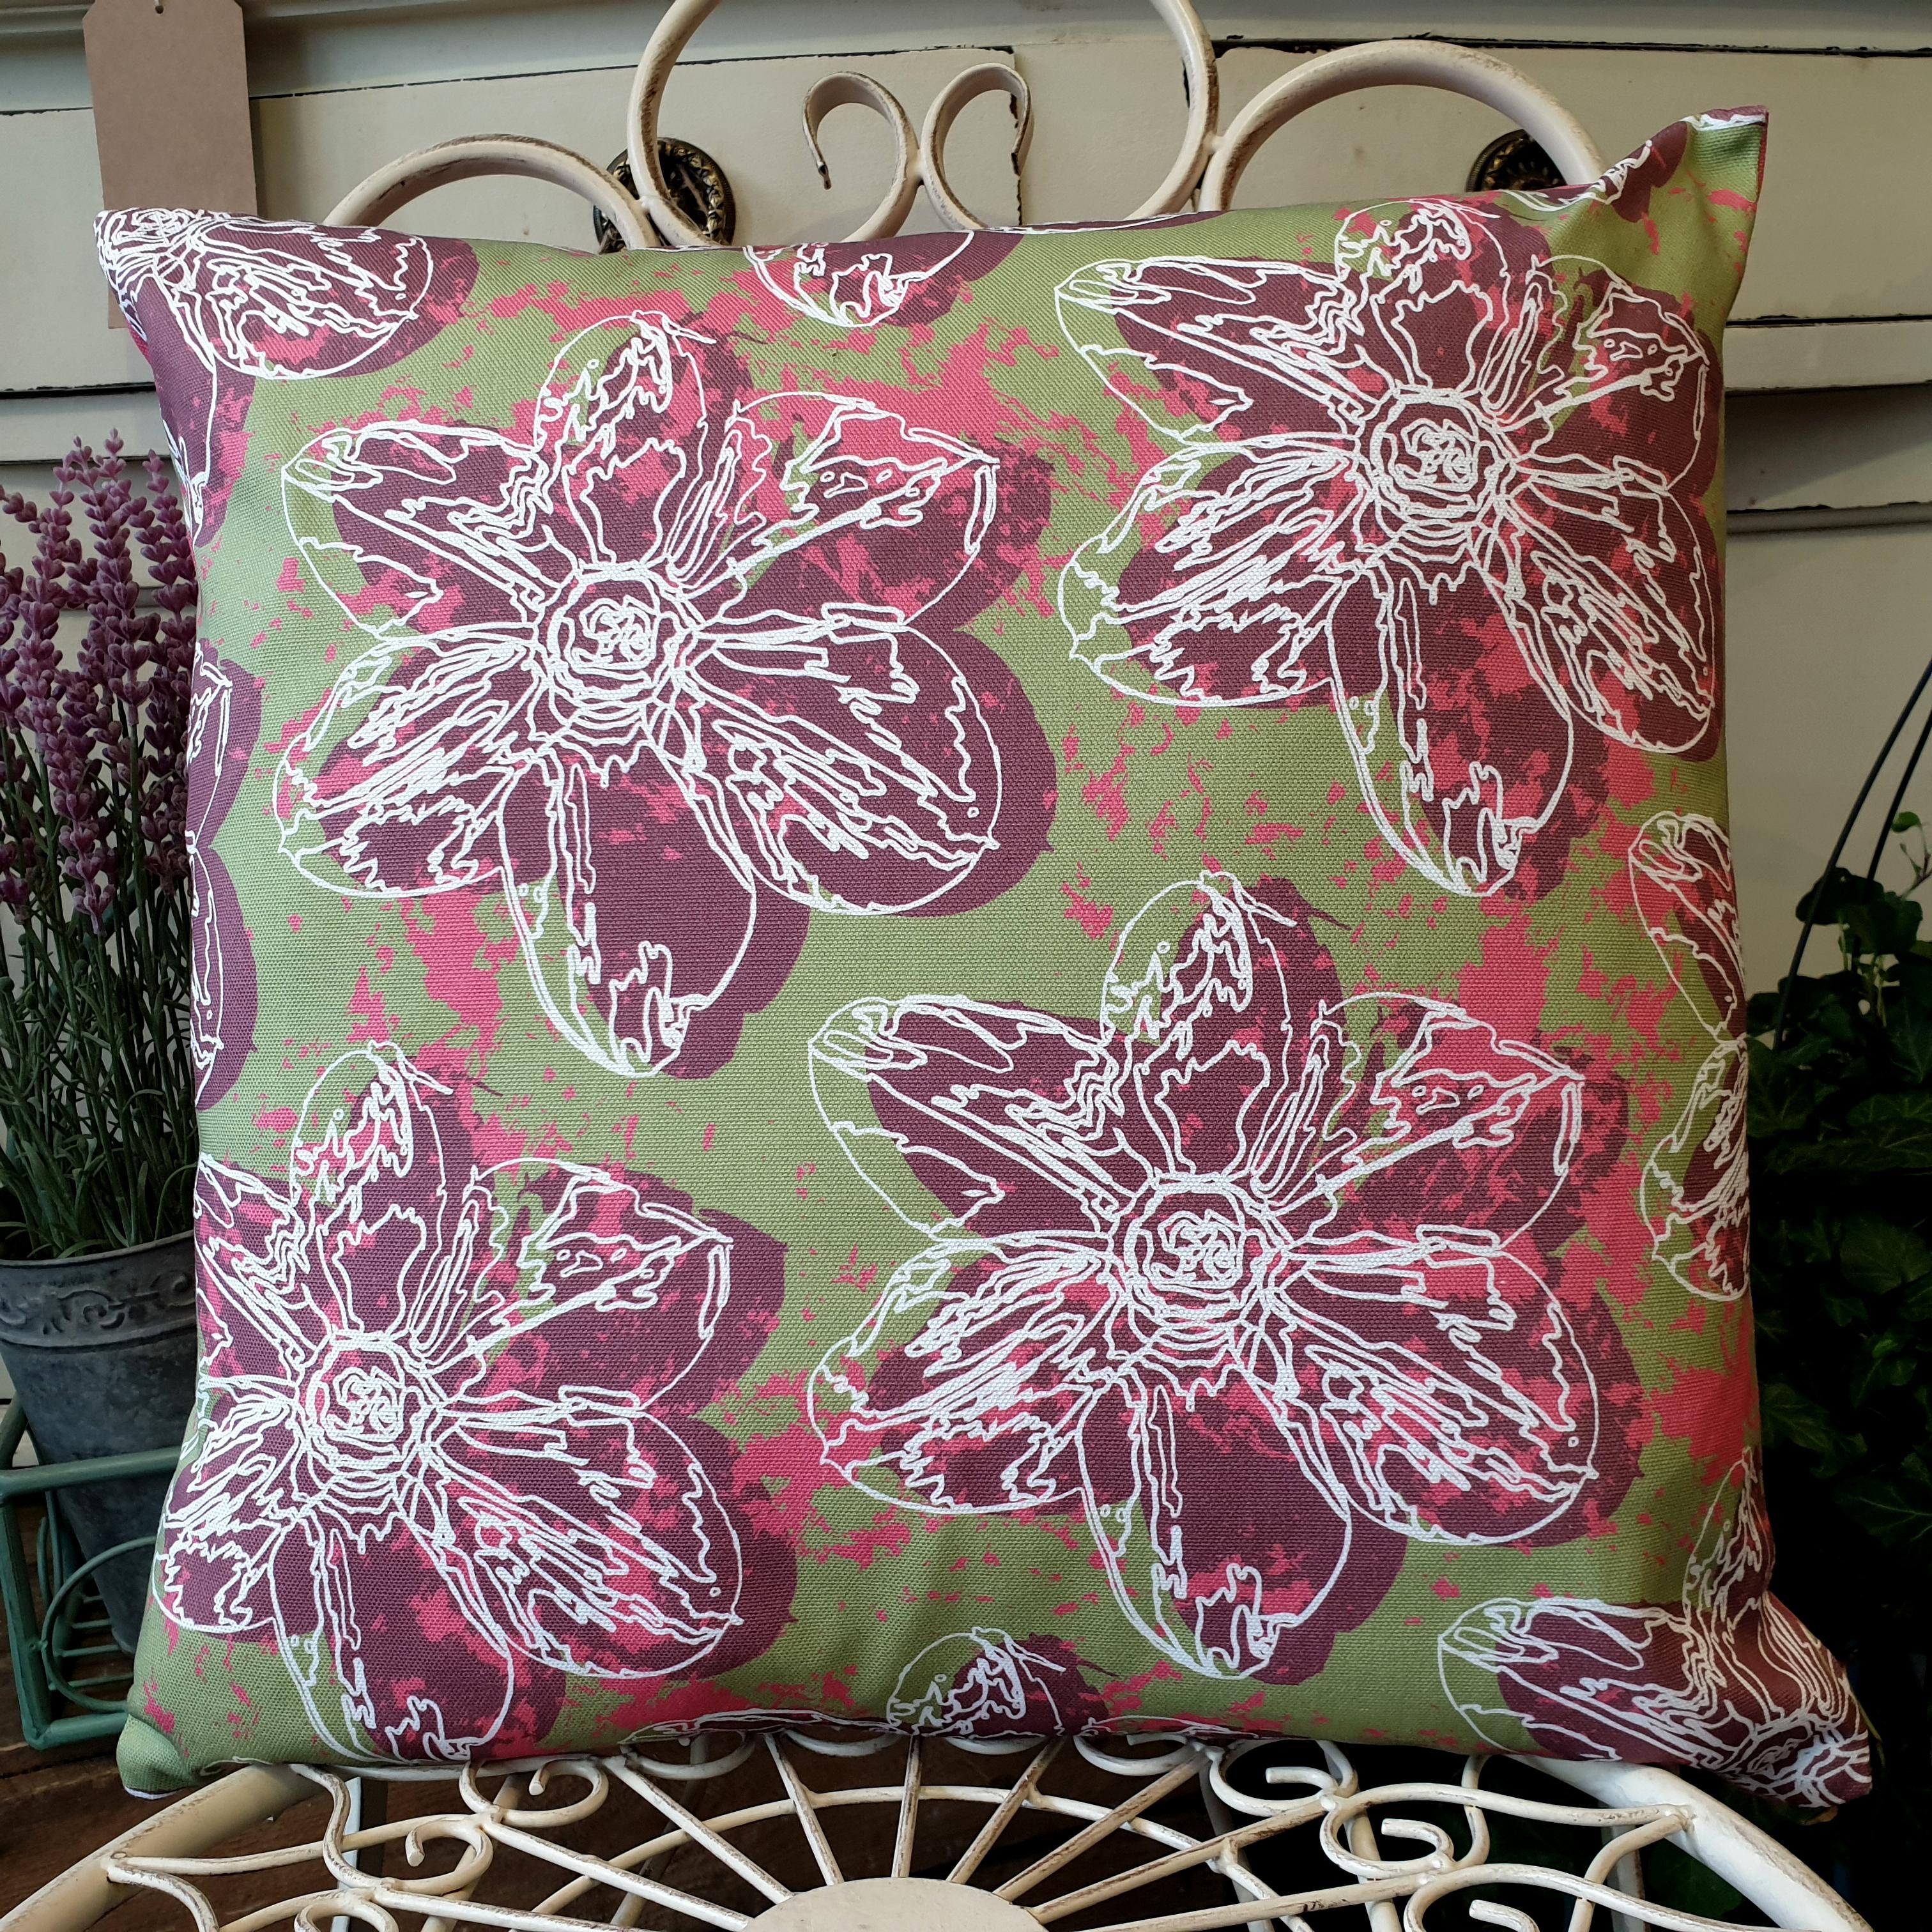 Double-sided 45cm square Flower Splash cushion designed by thetinkan. Dark red narcissus flower with white traced outline set within an olive green background with salmon pink paint splashes. Available with an optional luxury cushion inner pad. VIEW PRODUCT >>